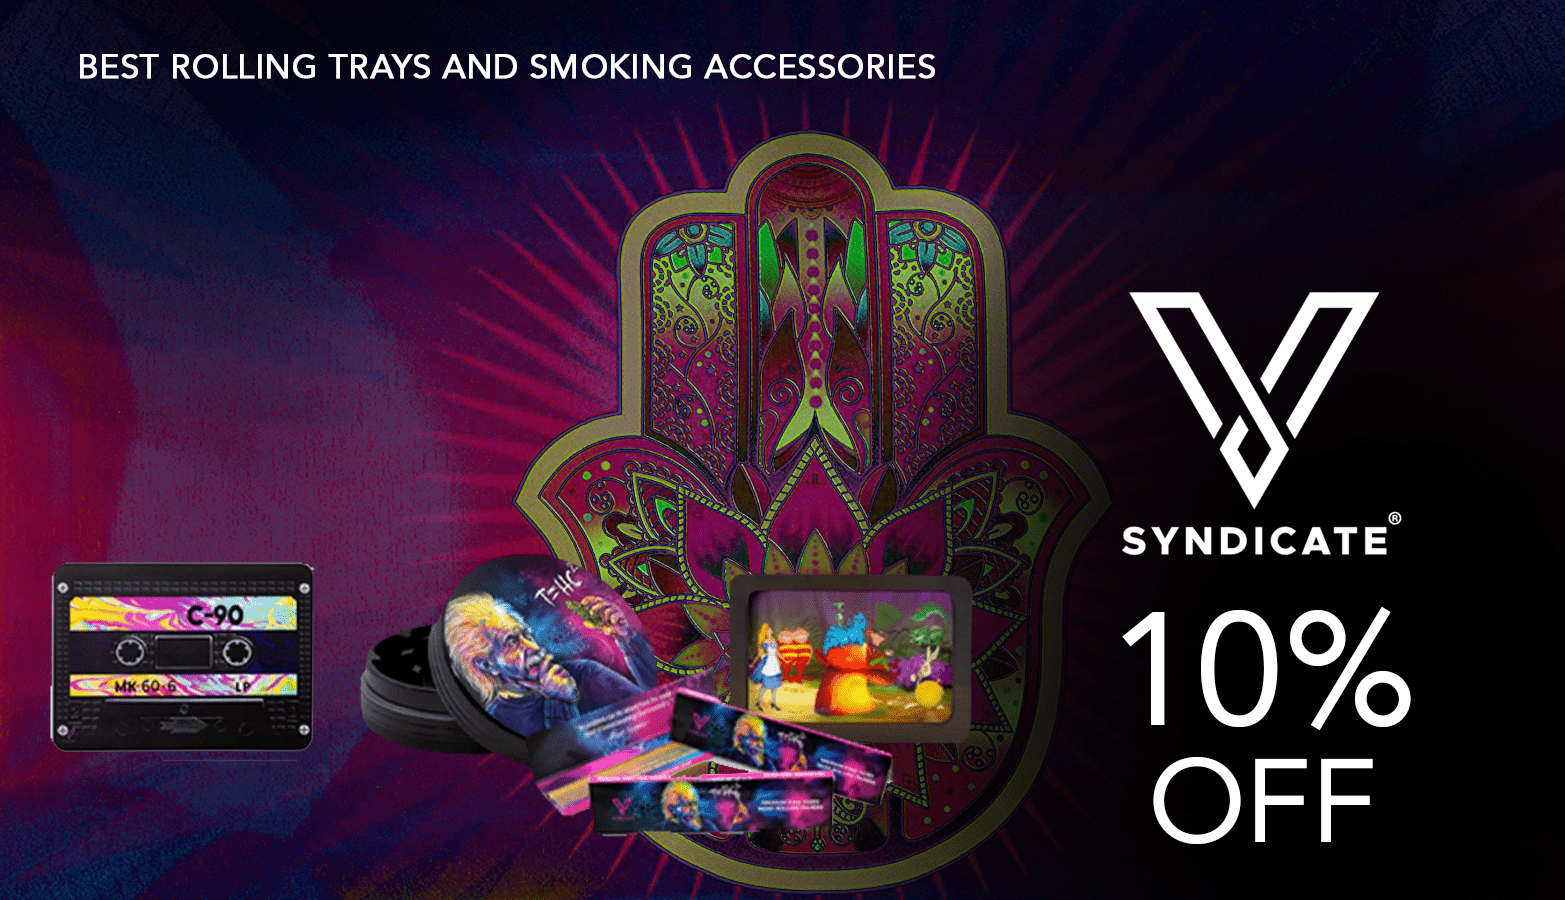 V Syndicate Coupon Code Website